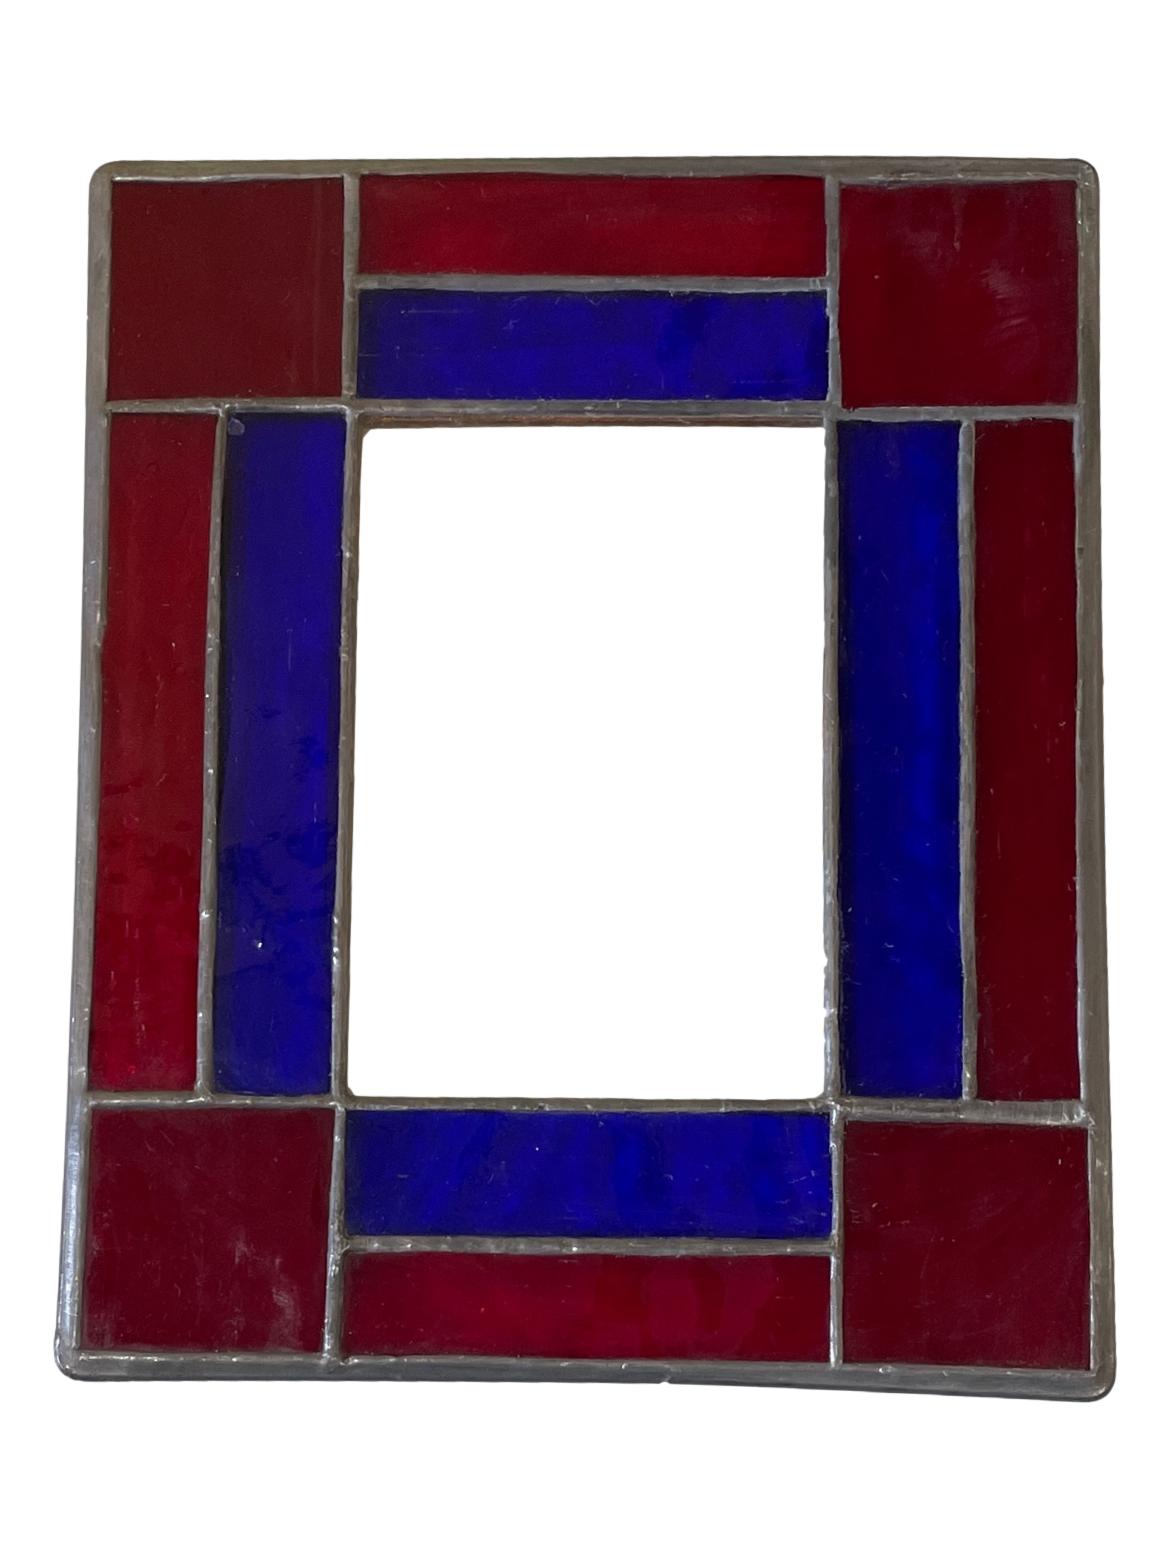 Stained Glass Frame Royal Blue & Red 8.5" L 7" W - Ysleta Mission Gift Shop- VOTED El Paso's Best Gift Shop